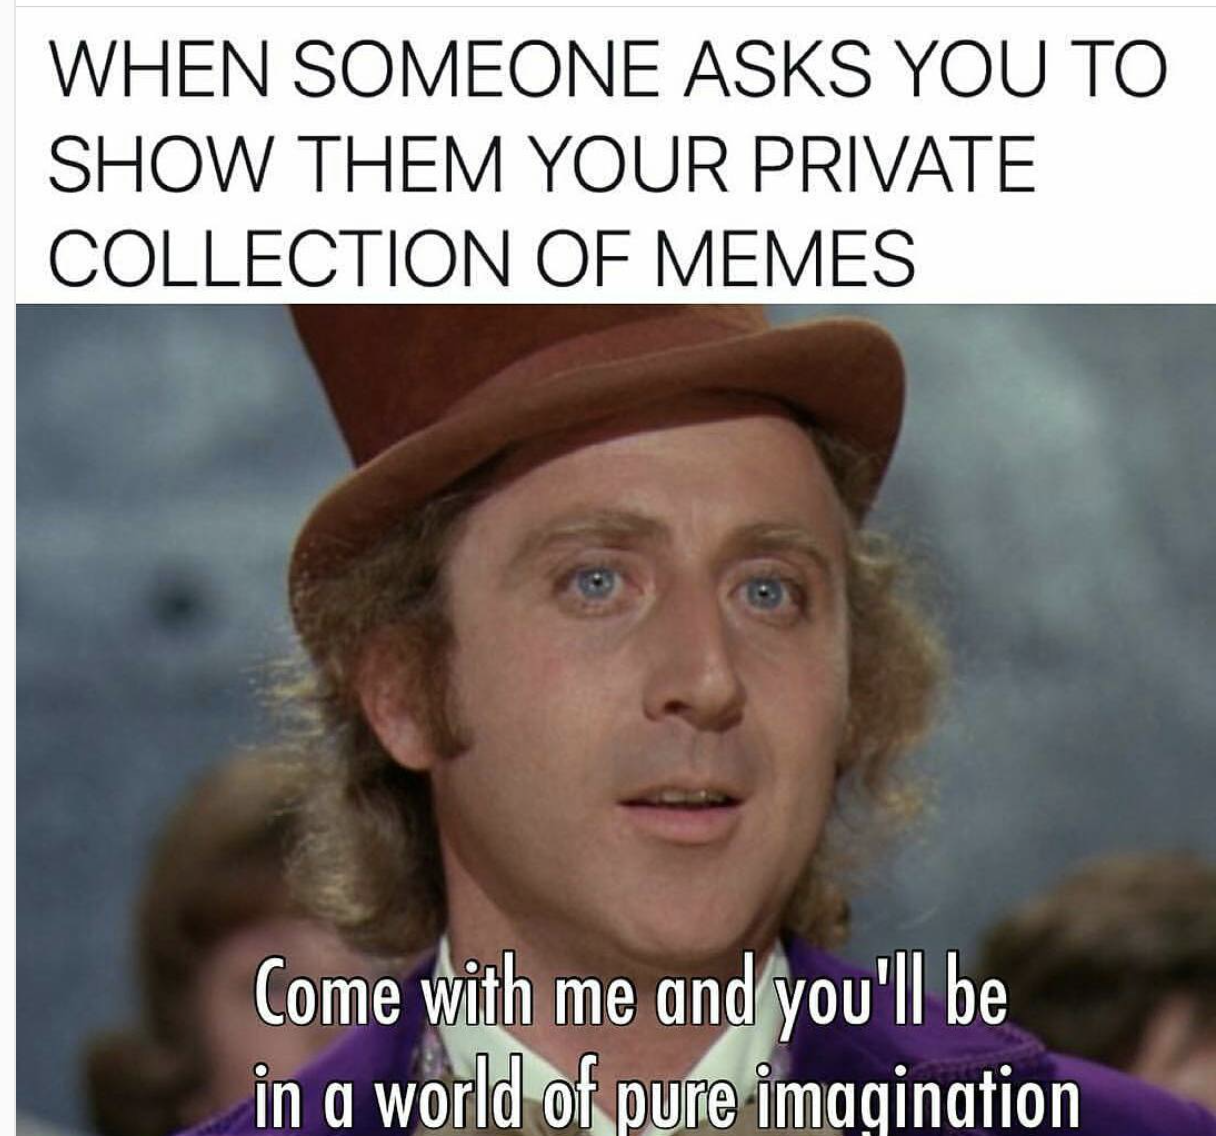 gene wilder as willy wonka - When Someone Asks You To Show Them Your Private Collection Of Memes Come with me and you'll be in a world of pure imagination